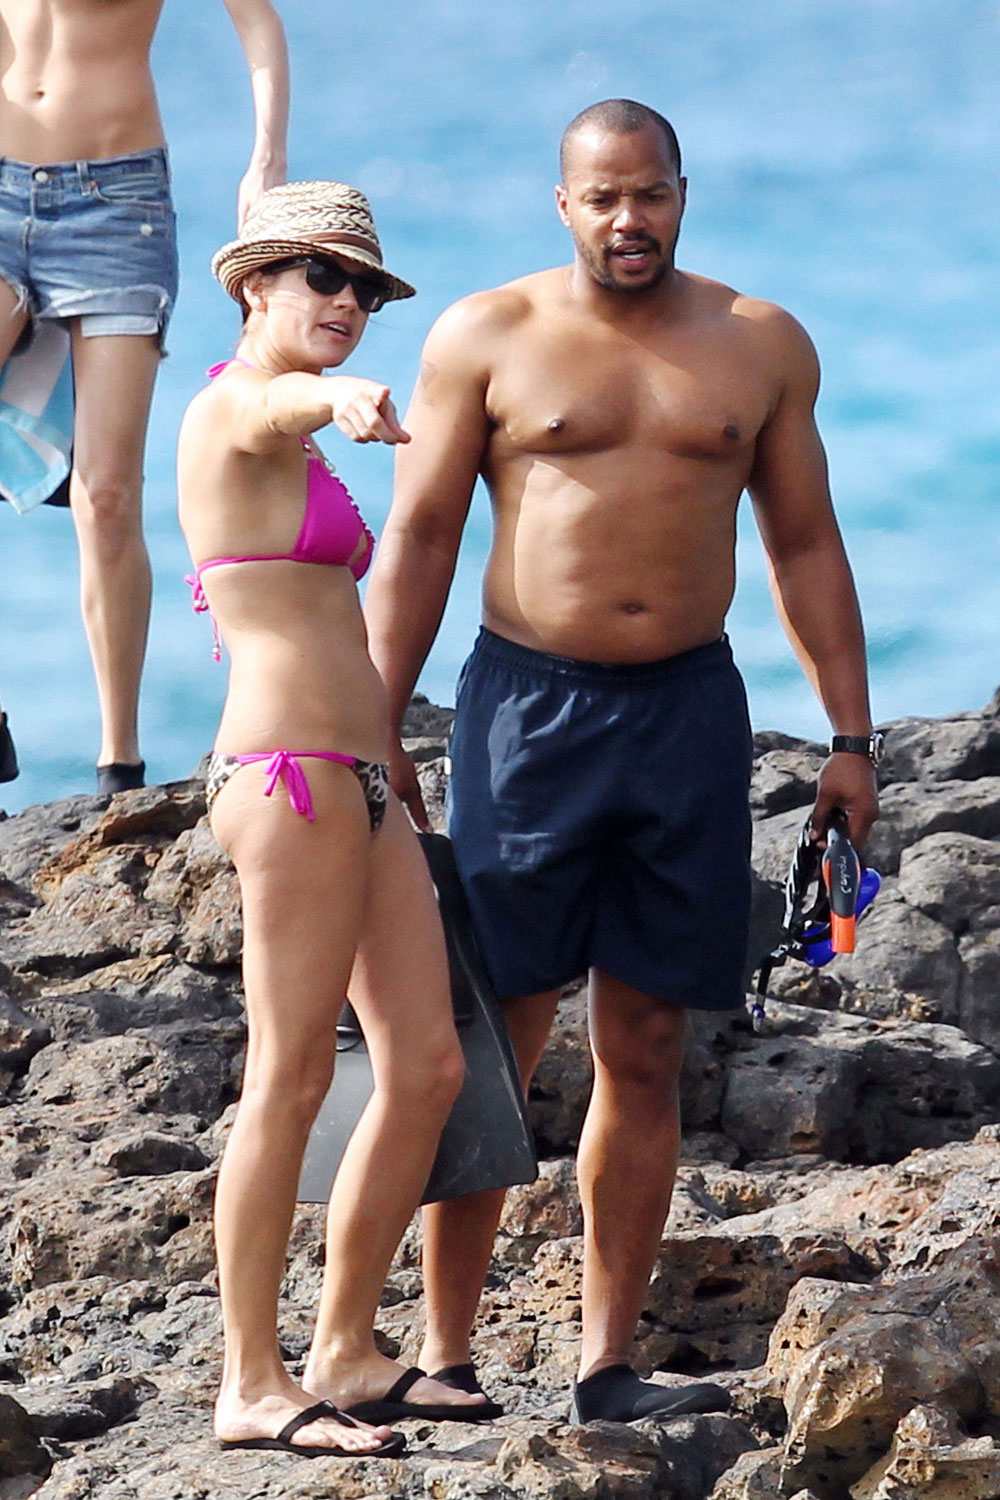 Zach Braff & Donald Faison go shirtless in Hawaii: who would you rather...